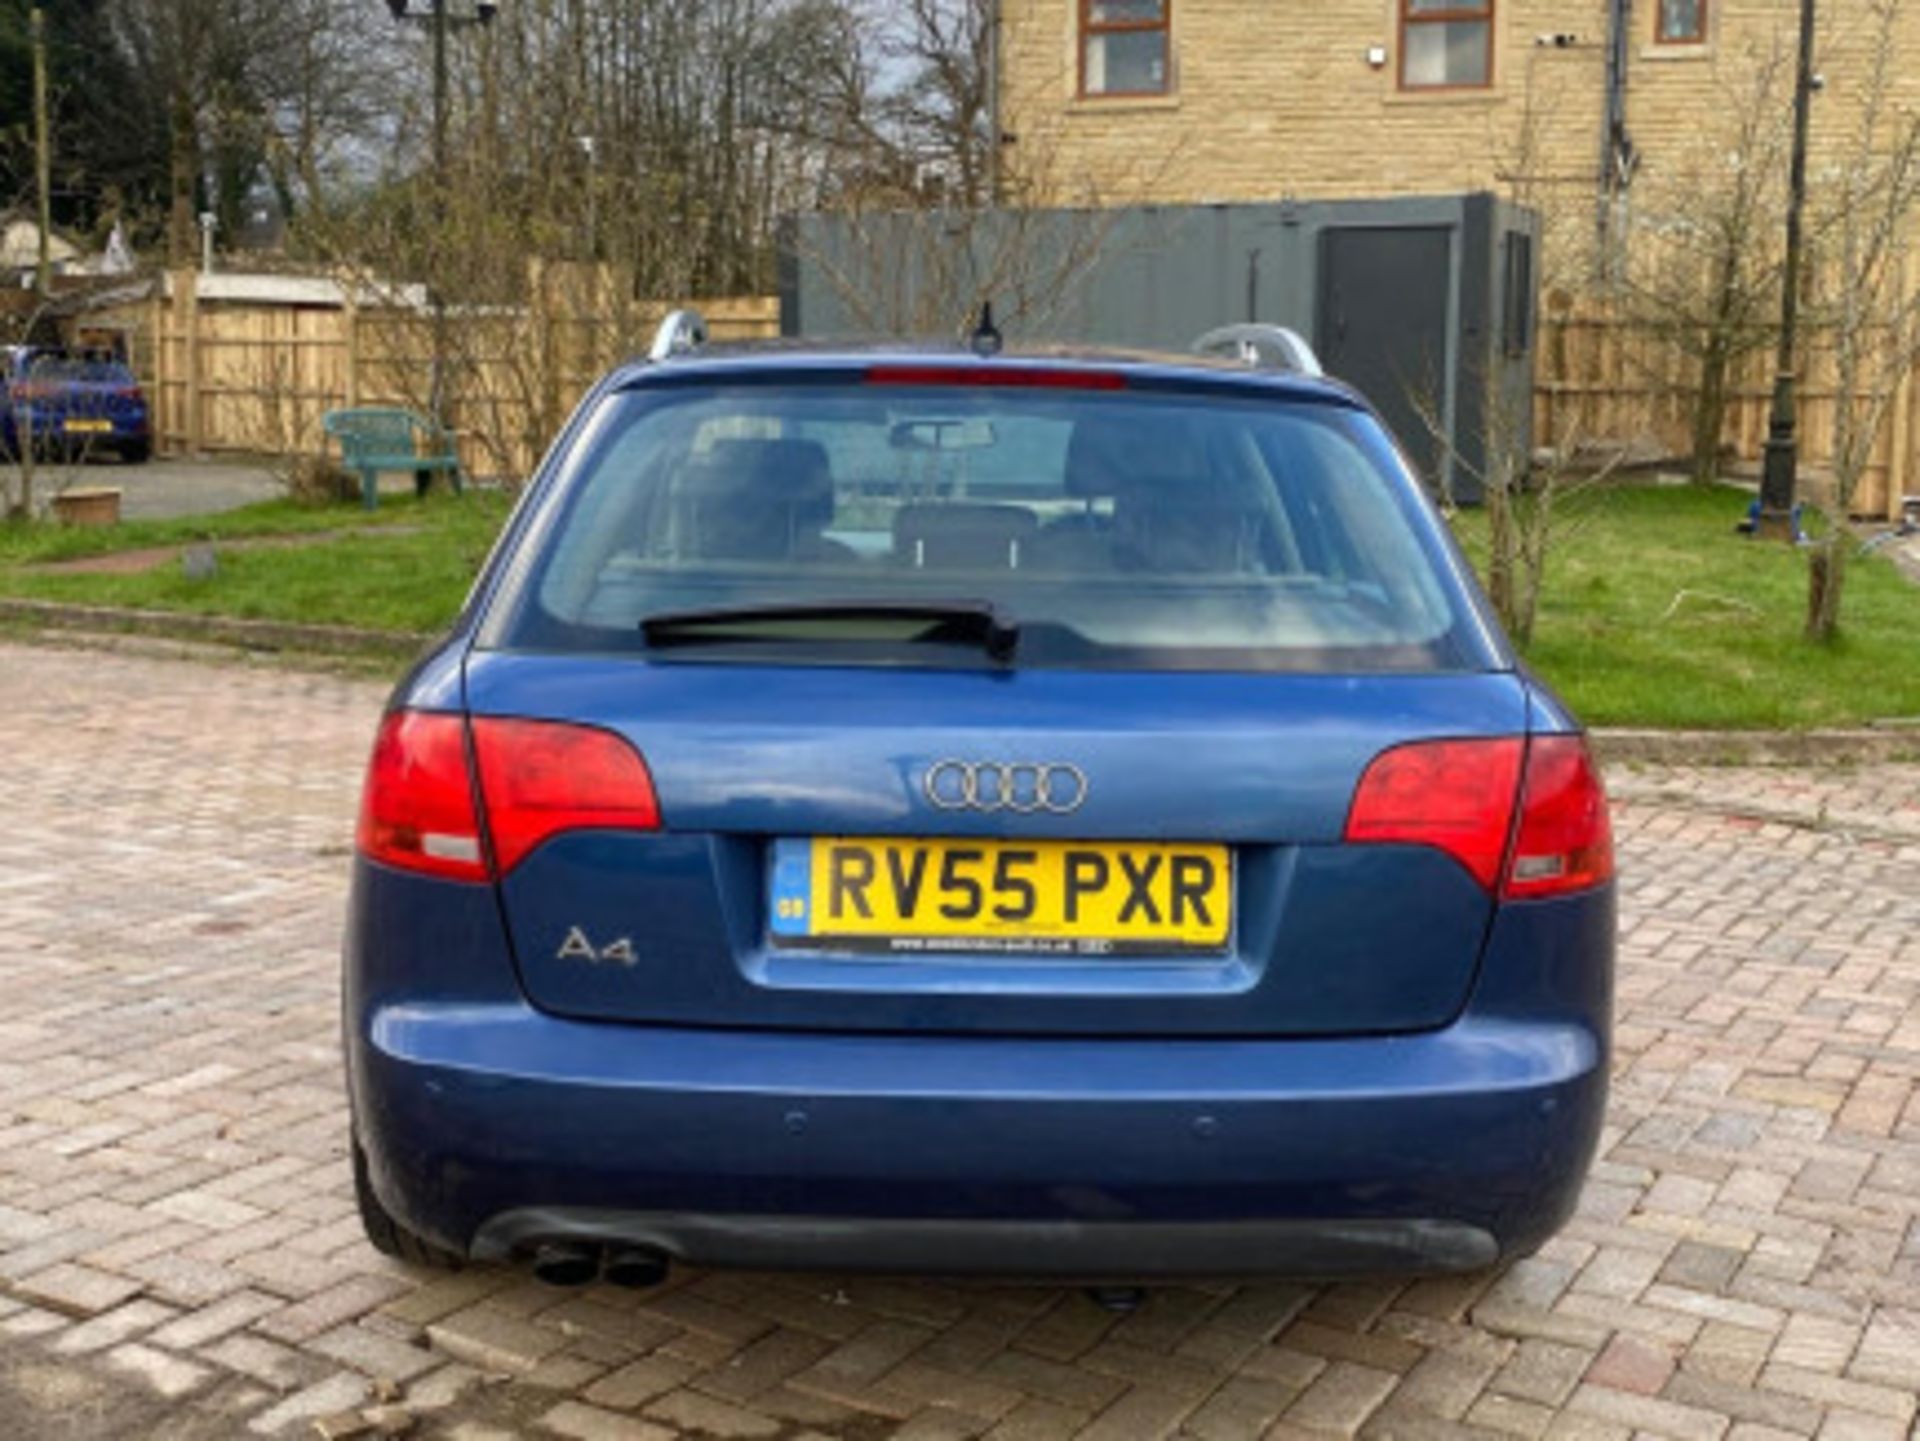 AUDI A4 AVANT 1.9 TDI SE 5DR ESTATE - RARE AND RELIABLE LUXURY WAGON >>--NO VAT ON HAMMER--<< - Image 39 of 97